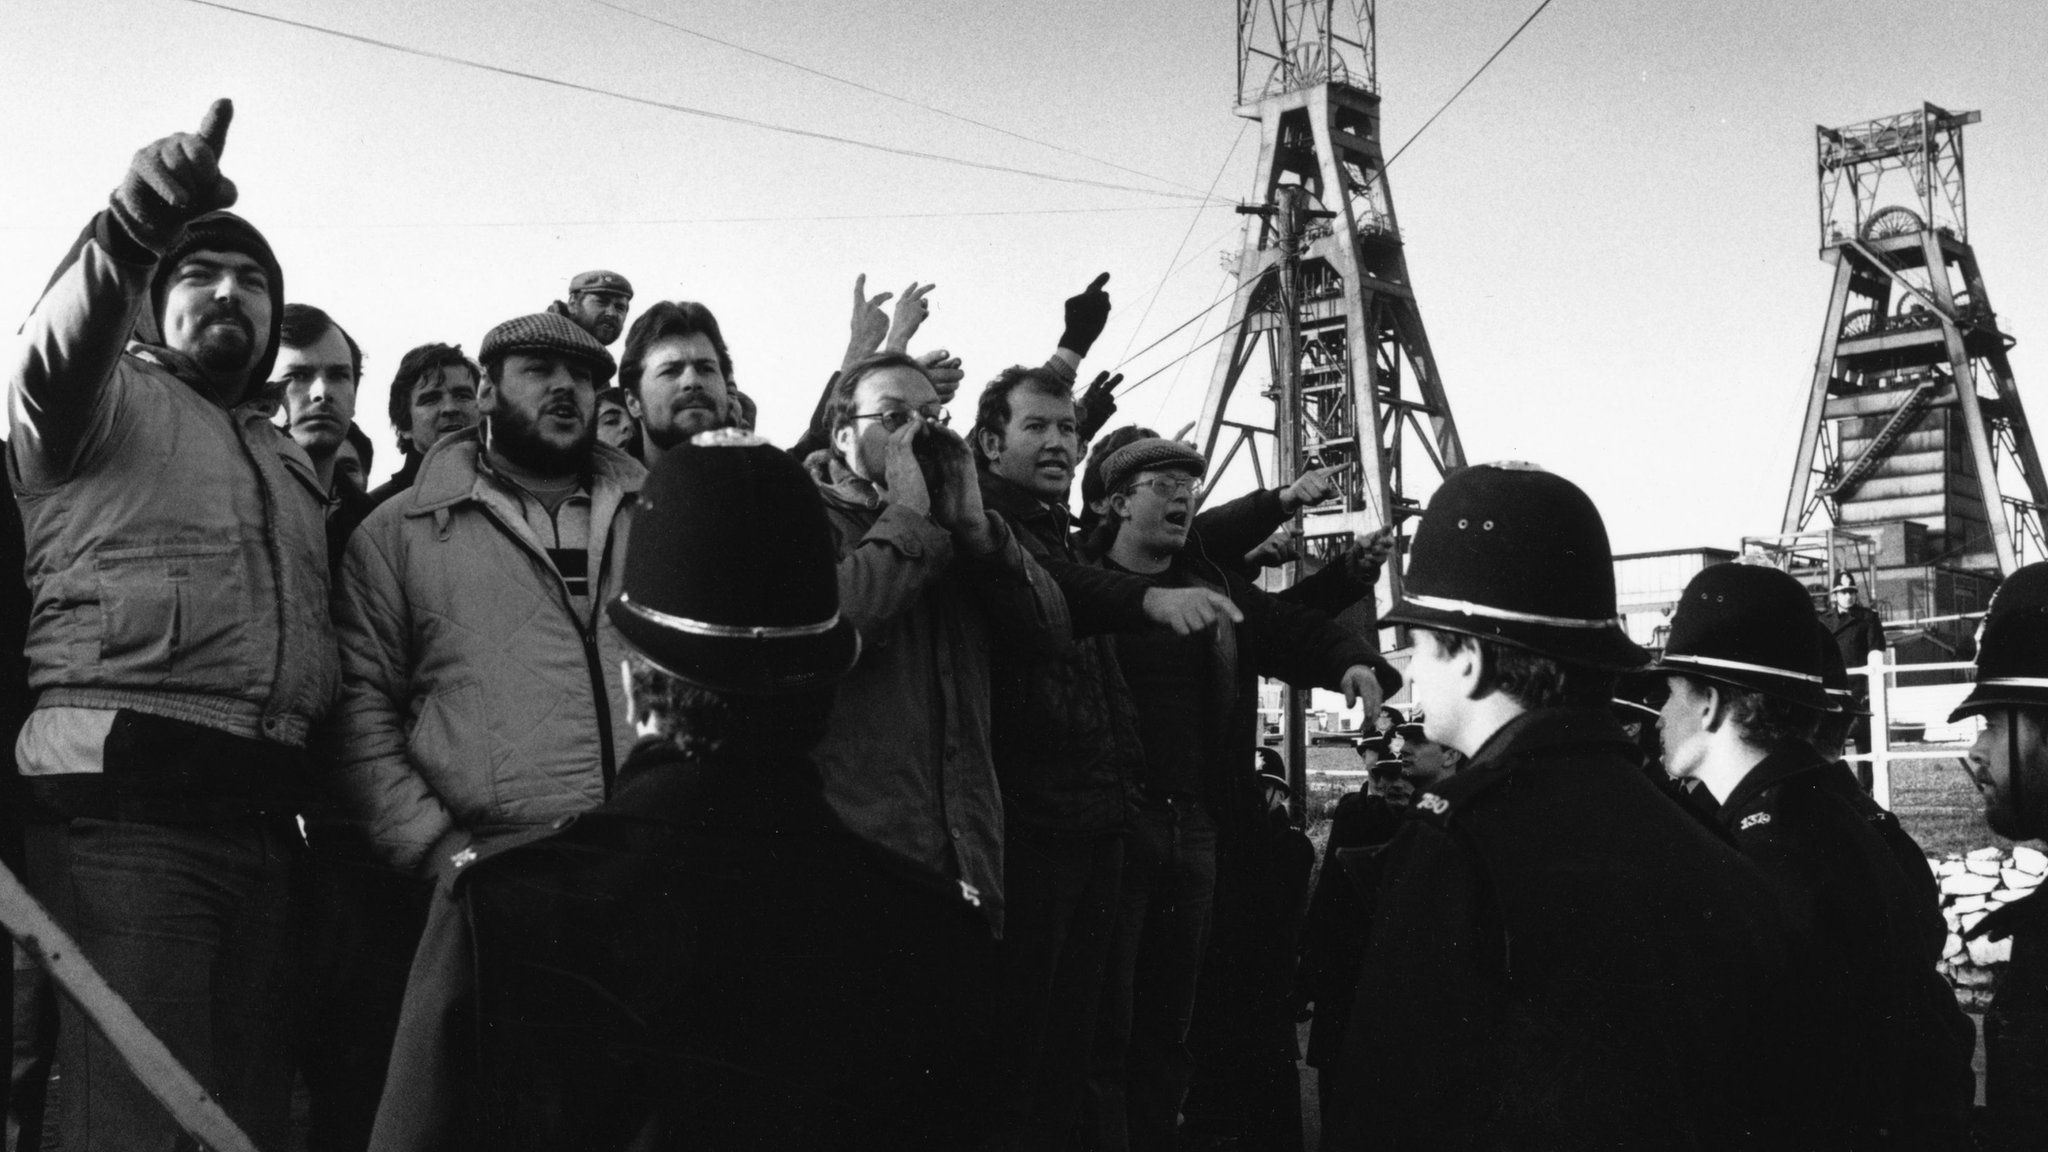 Miners being monitored by the police in 1984